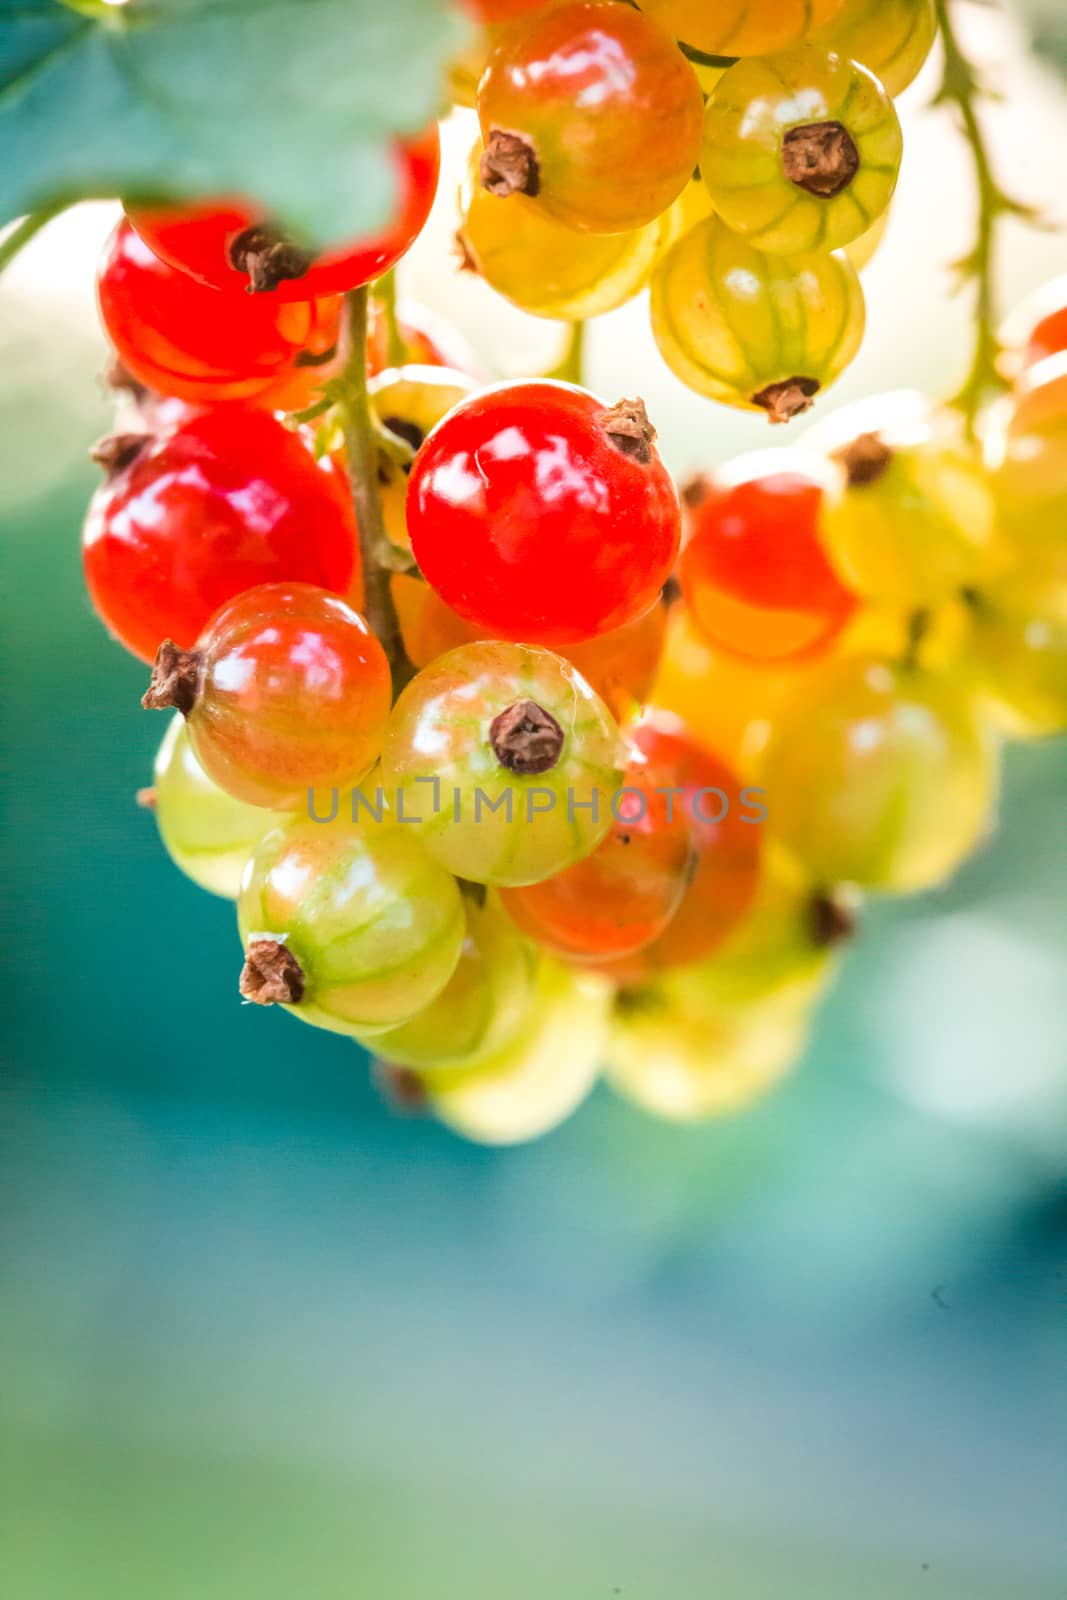 Berries of currant on bush, ripe and unripe red currant.